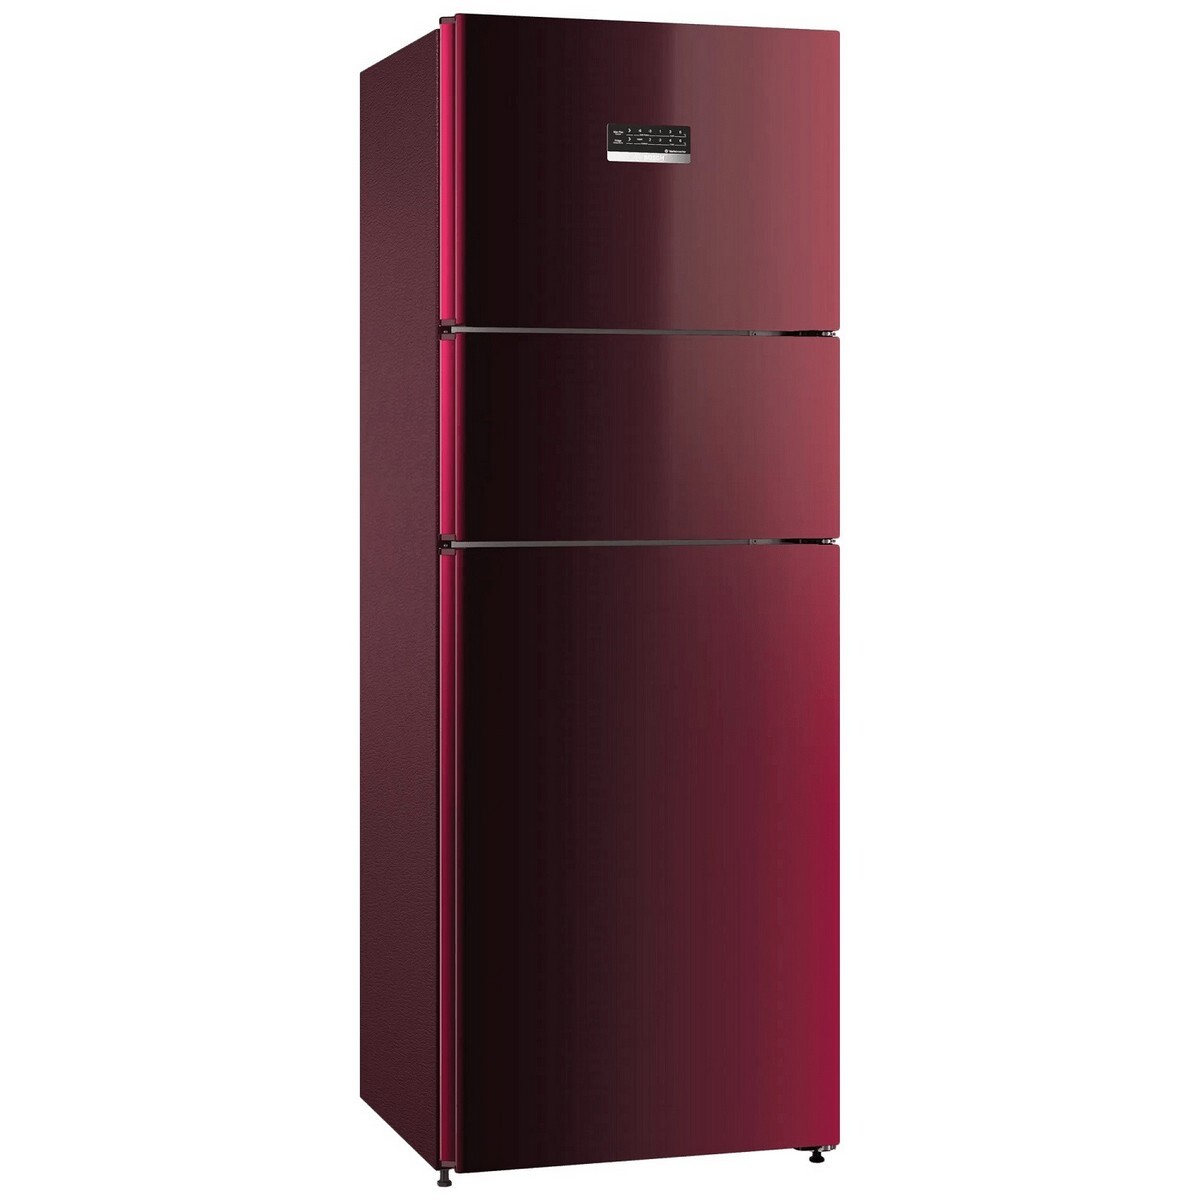 Bosch Frost Free Refrigerator CMC36WT5NI 364L Candy Red